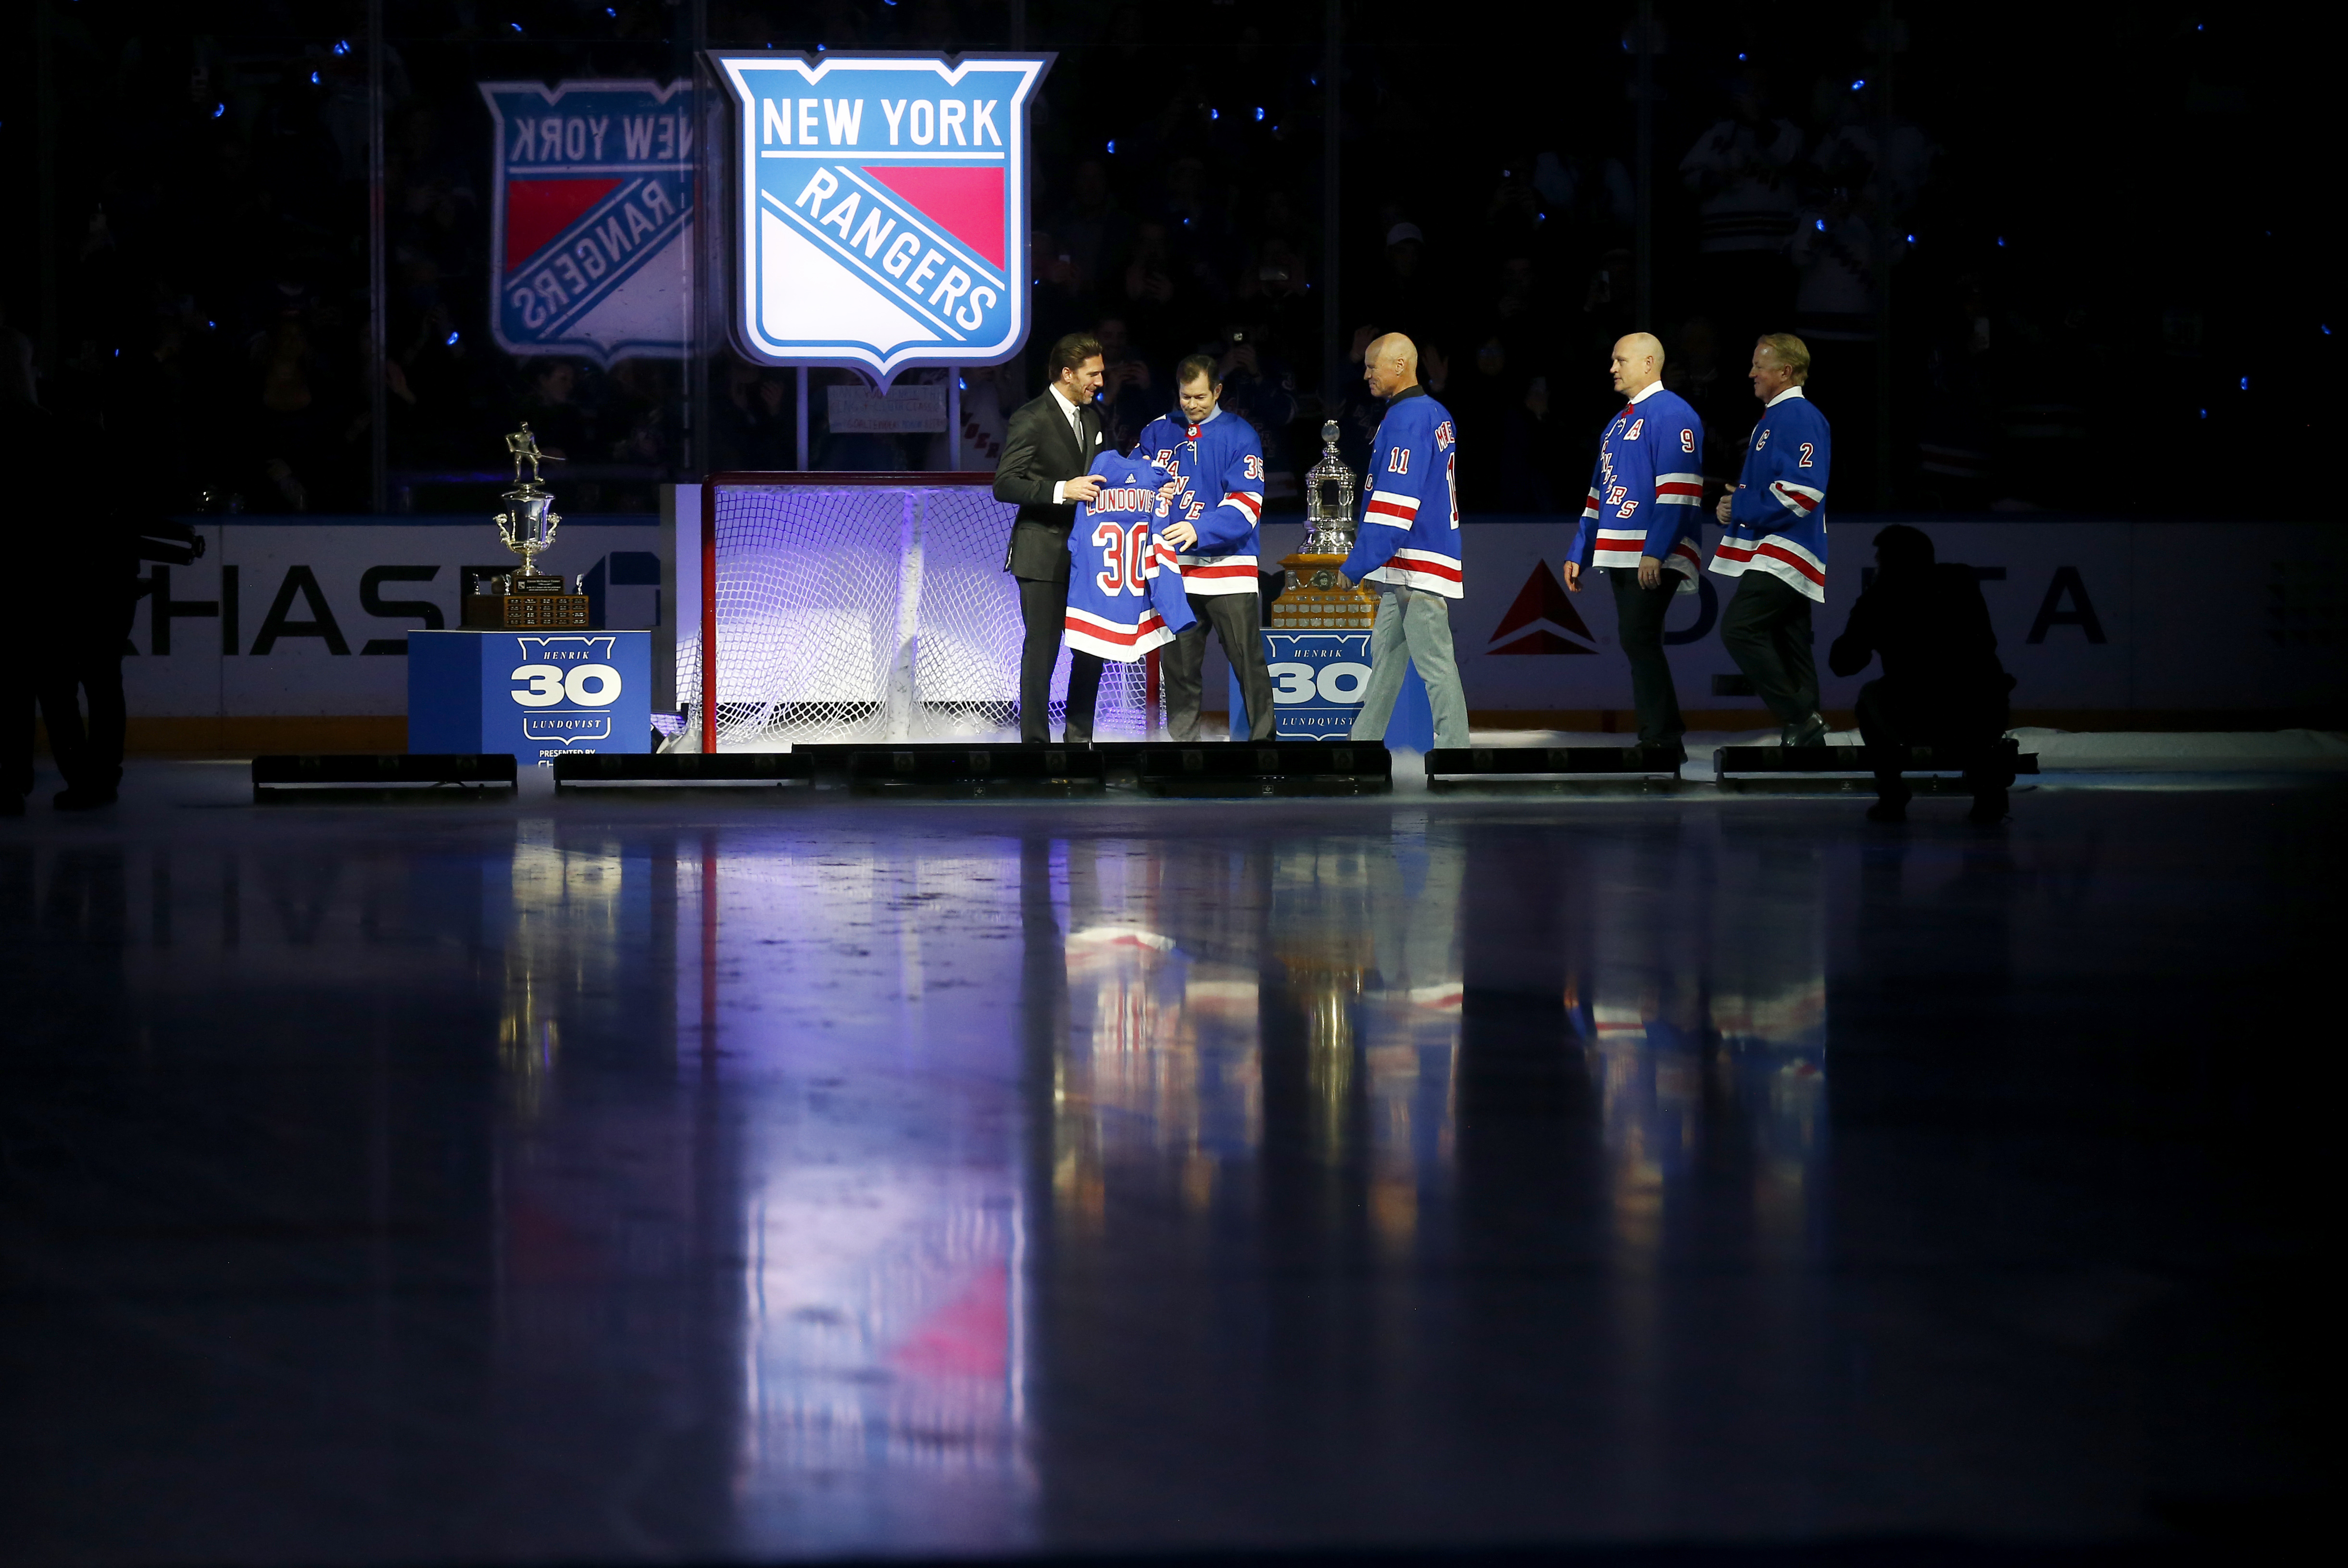 The Rangers numbers to retire after Henrik Lundqvist